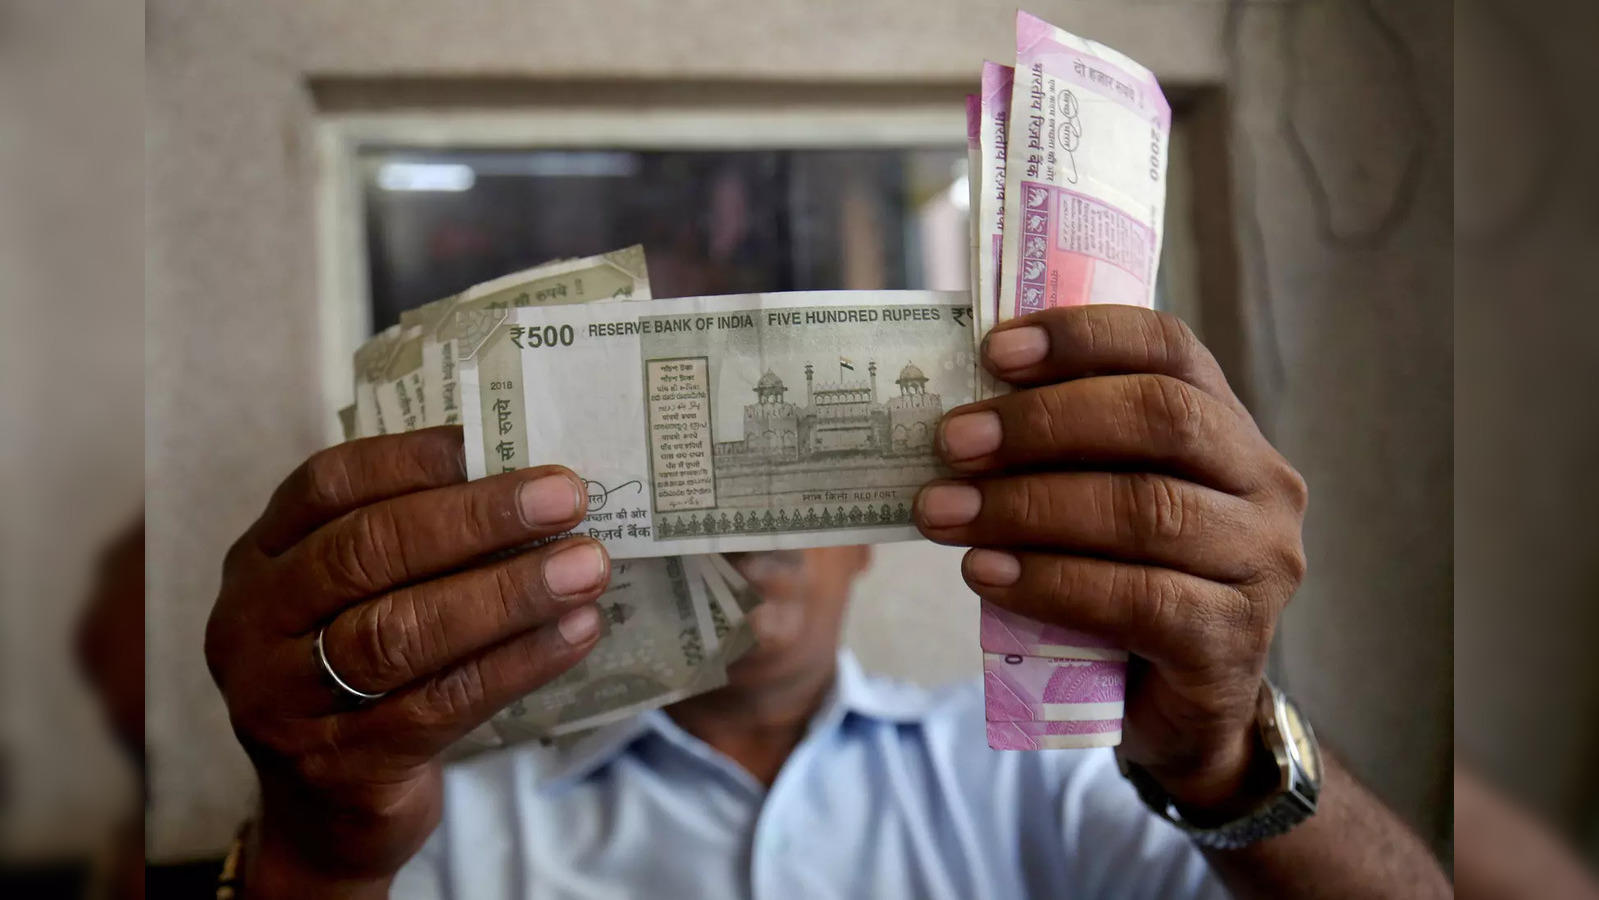 USD to INR Live - Convert US Dollar to INR Today at Best Rates